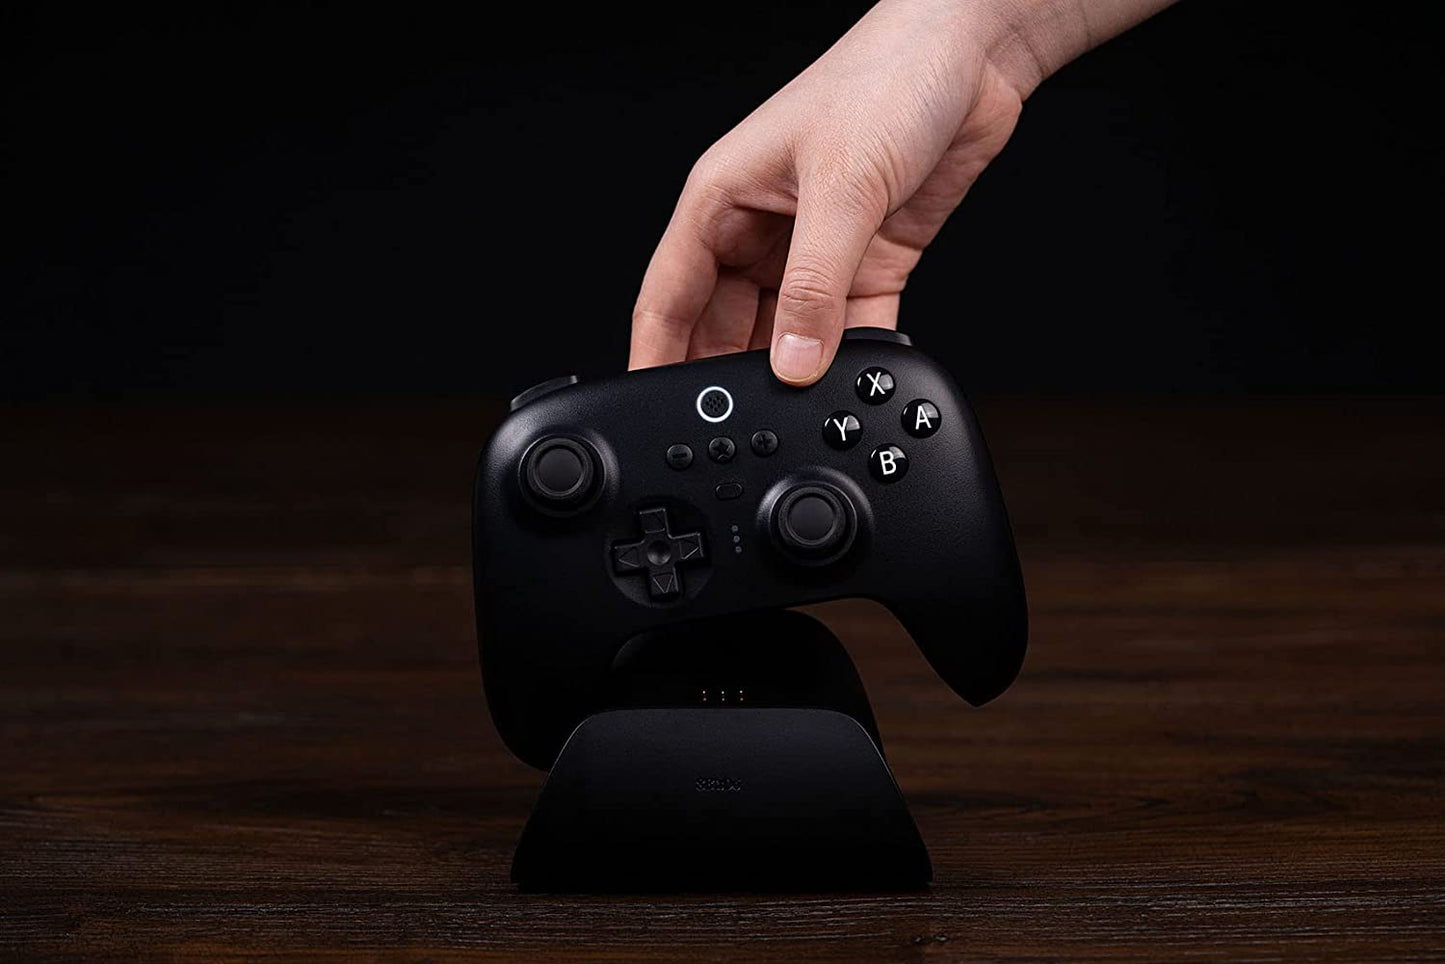 Premium Wireless Bluetooth Controller with Charging Dock and Hall Effect Sensing Joystick for Switch, Windows, and Steam Deck - Black